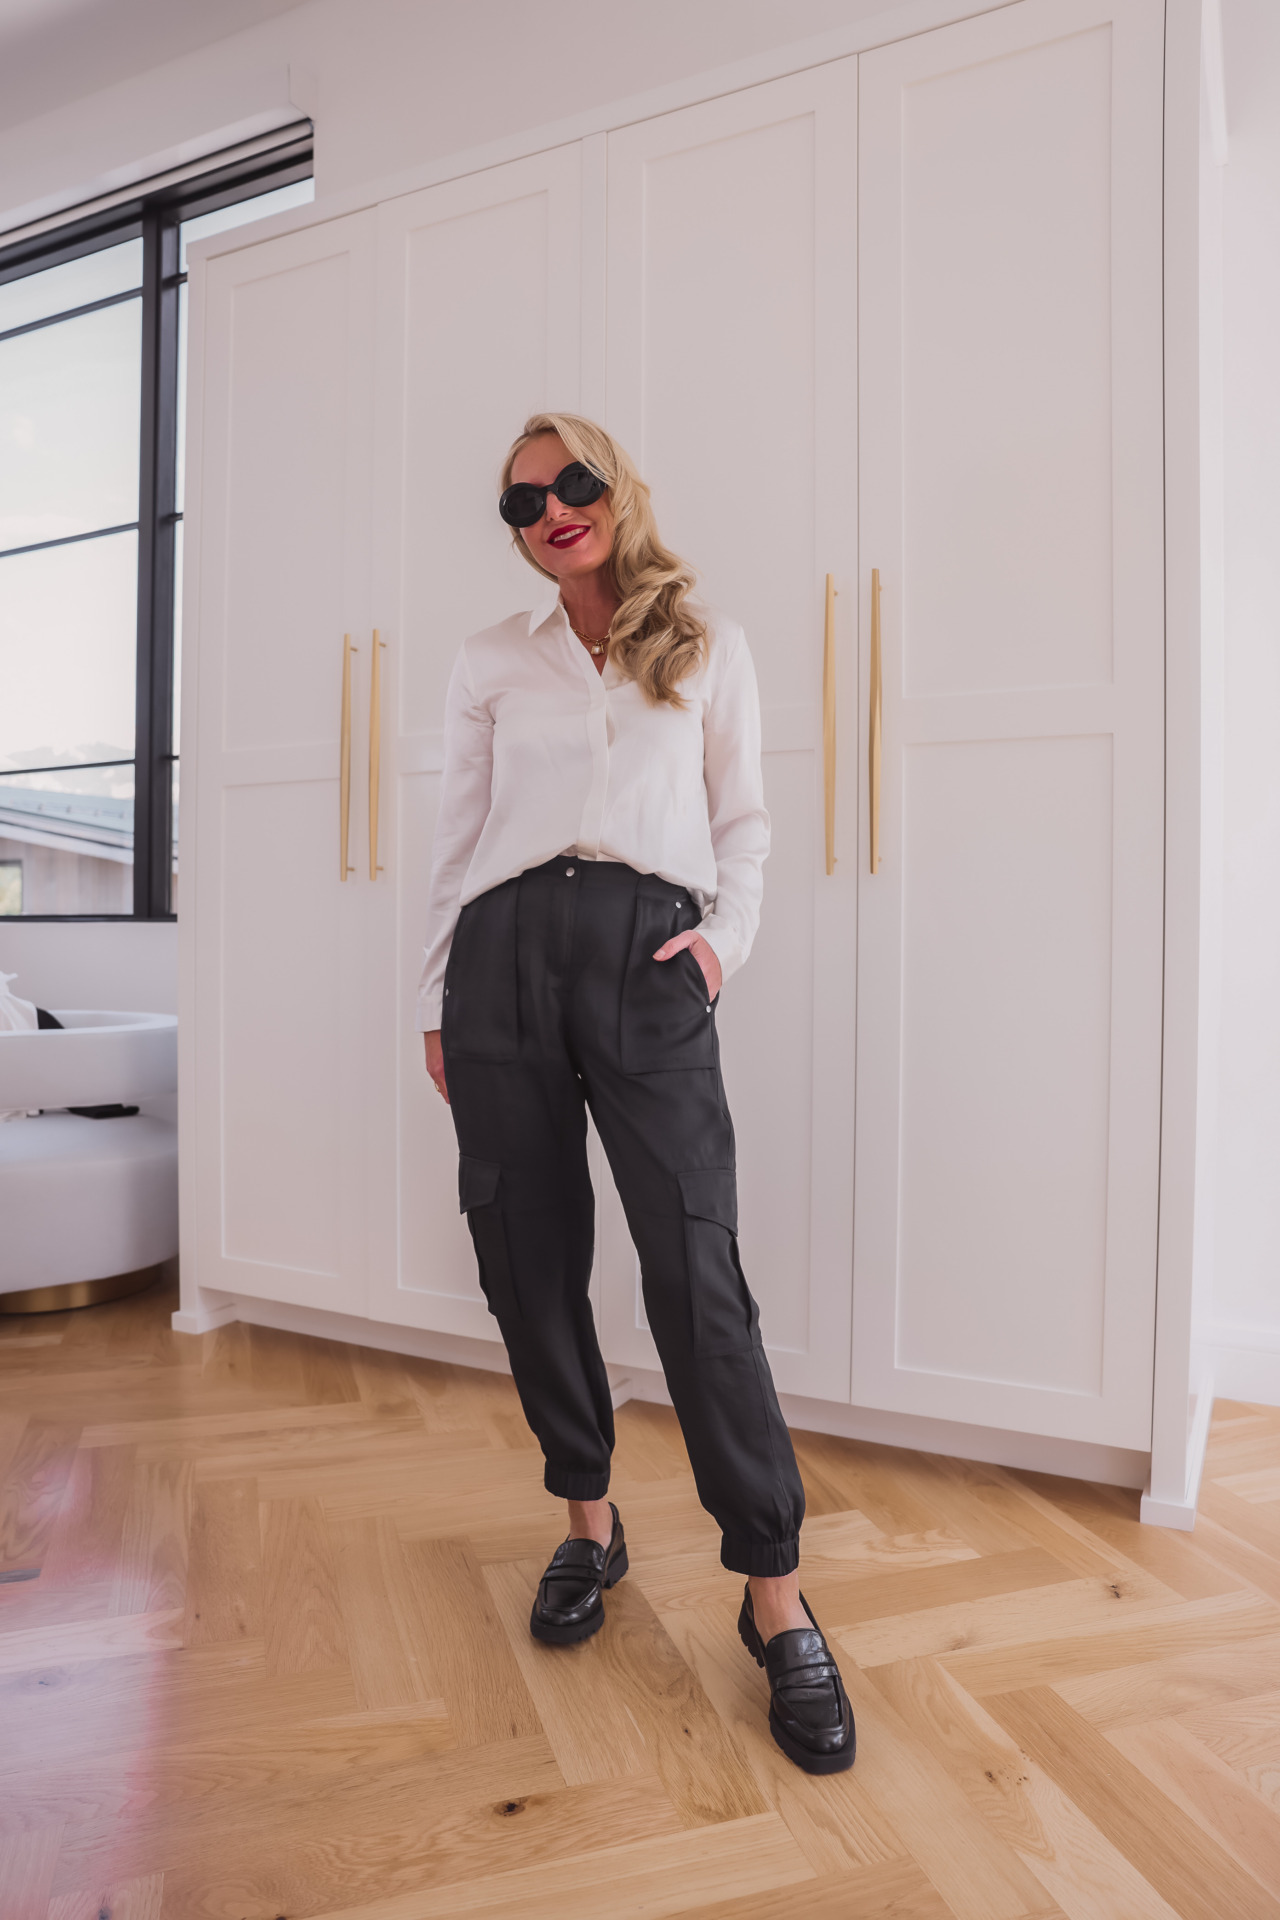 How to wear loafers, how to style loafers, what to wear with loafers, how to wear loafers women, womens loafers, stylish outfits with loafers, loafer outfits, what to wear with loafers women, how to wear loafers 2023, how to wear loafers casually, erin busbee, busbee style, fashion over 40, dolce vita black loafers, loewe oval sunglasses, monica vinader jewelry, white silky frame button down shirt, black cinq a sept giles joggers